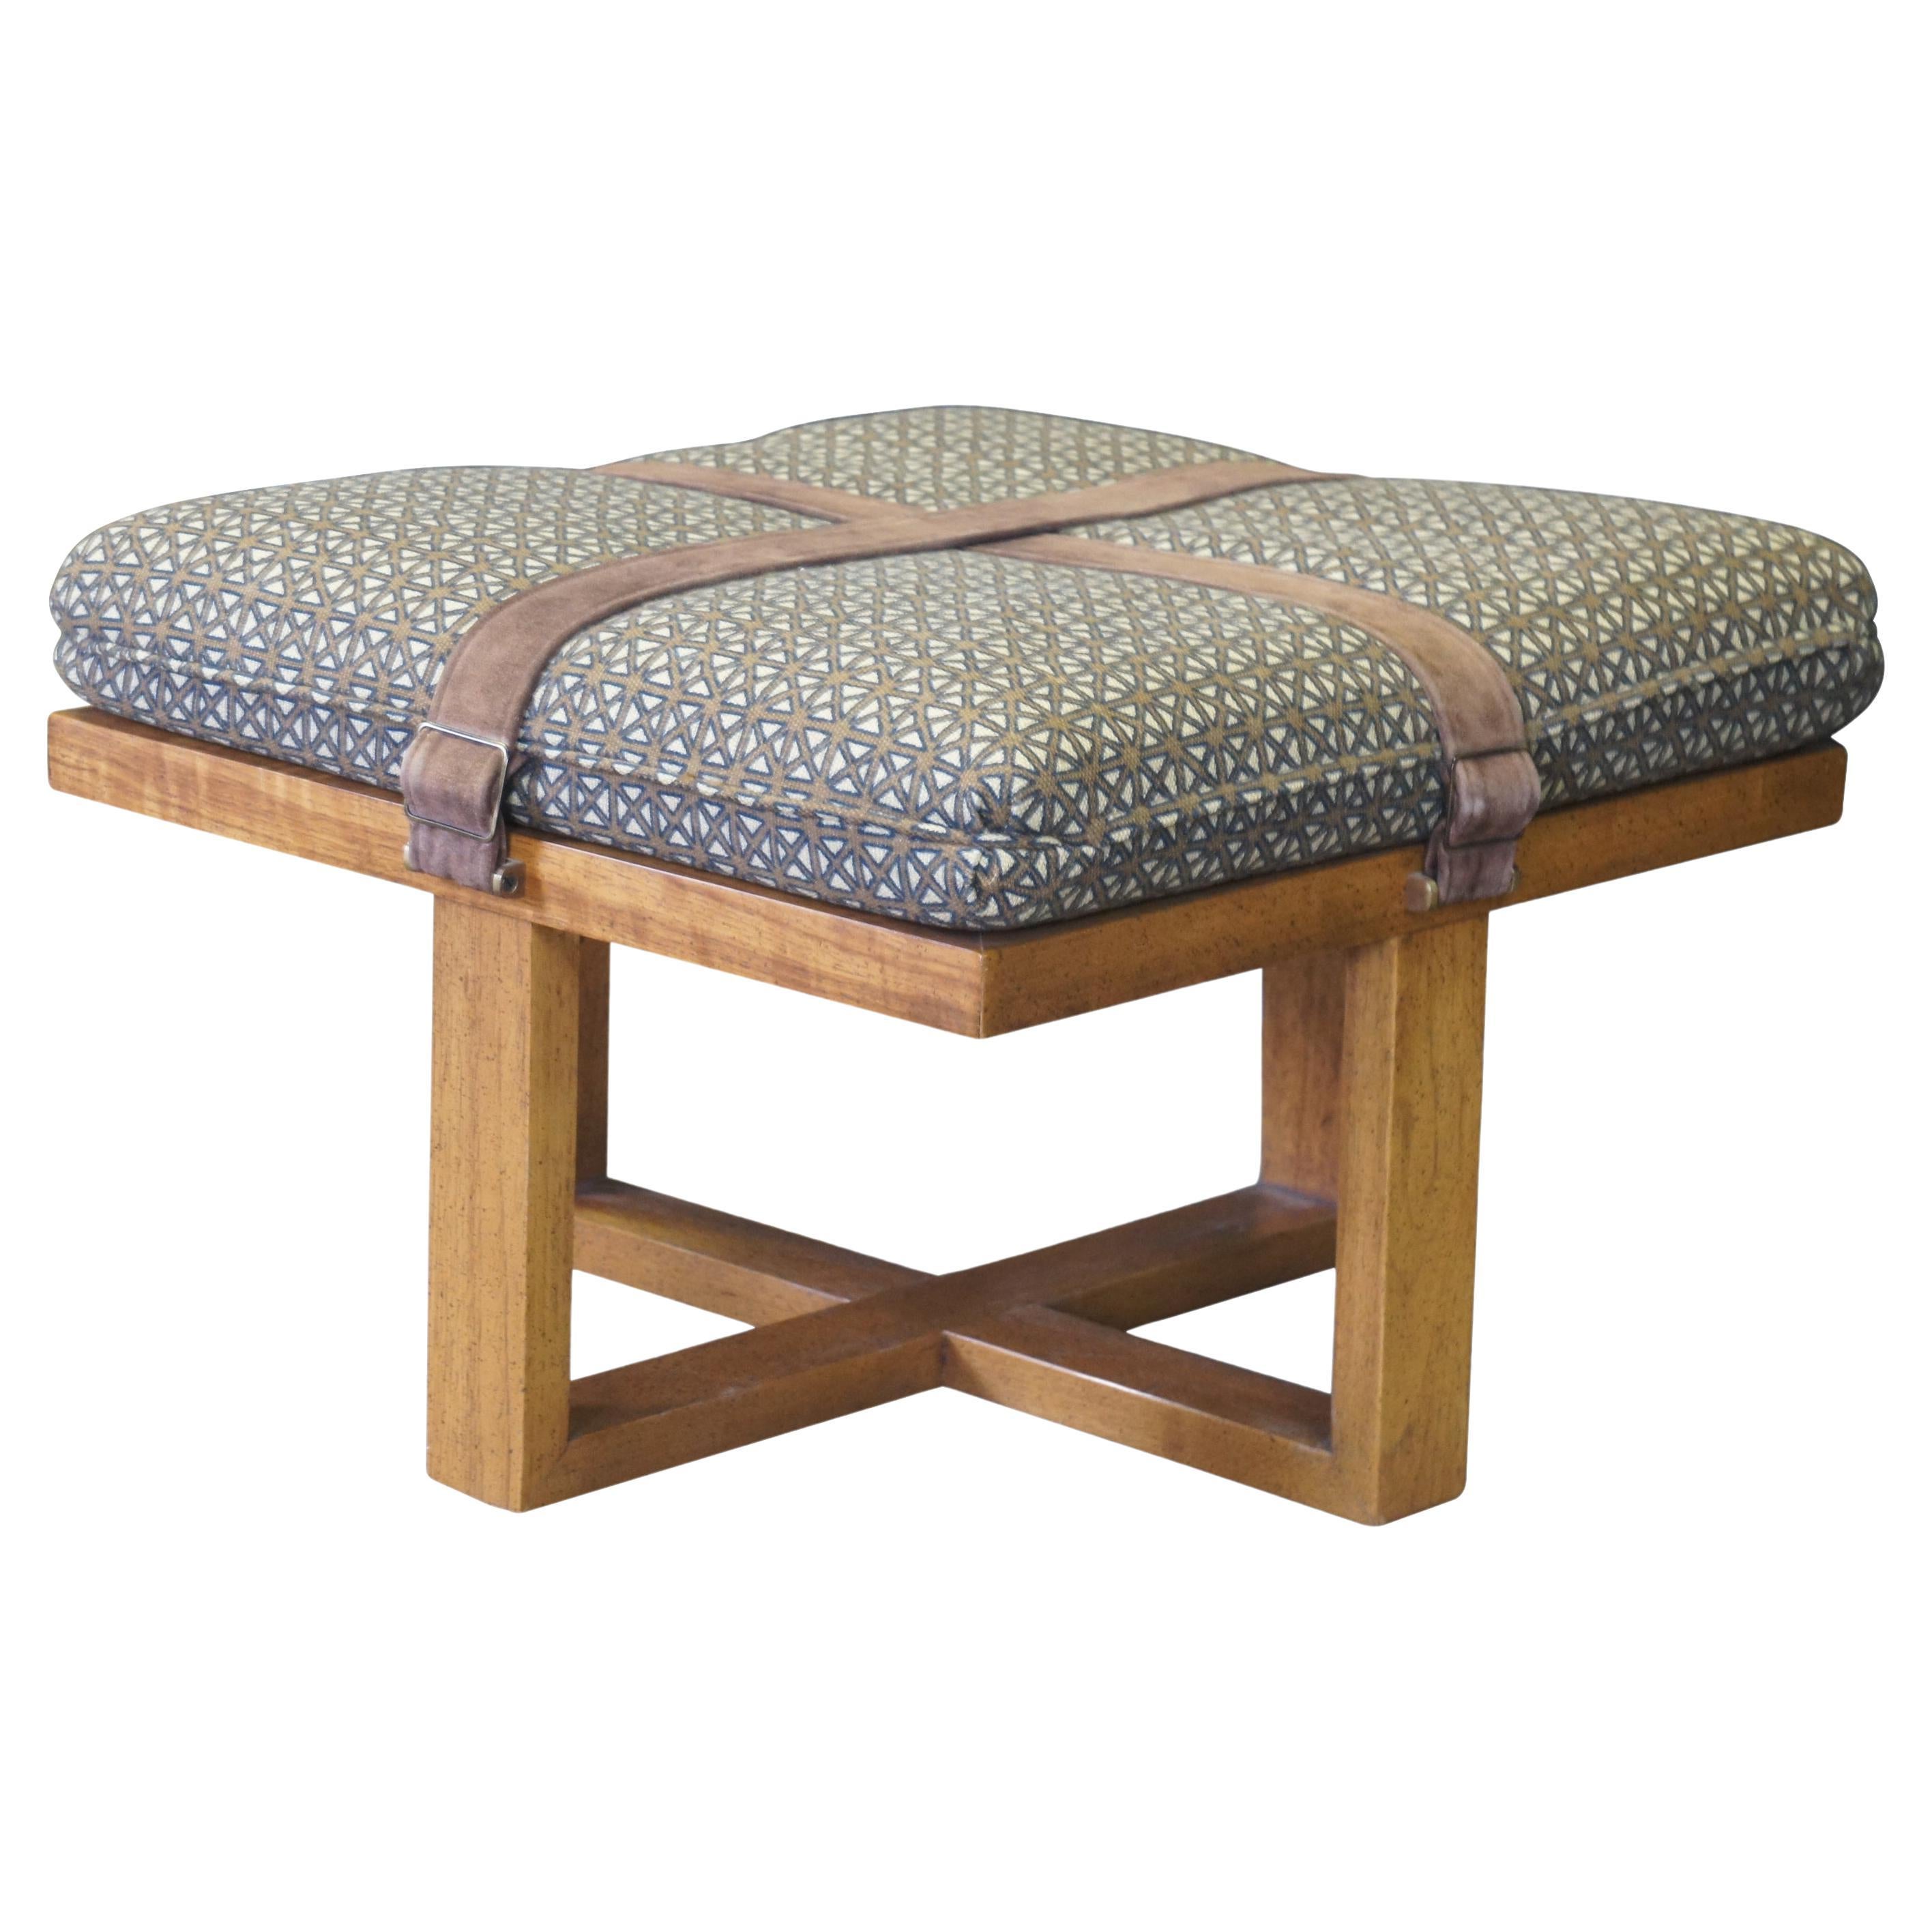 Late 20th C. Modern Oak Buckled Suede Strap Ottoman Square Foot Stool Bench  MCM For Sale at 1stDibs